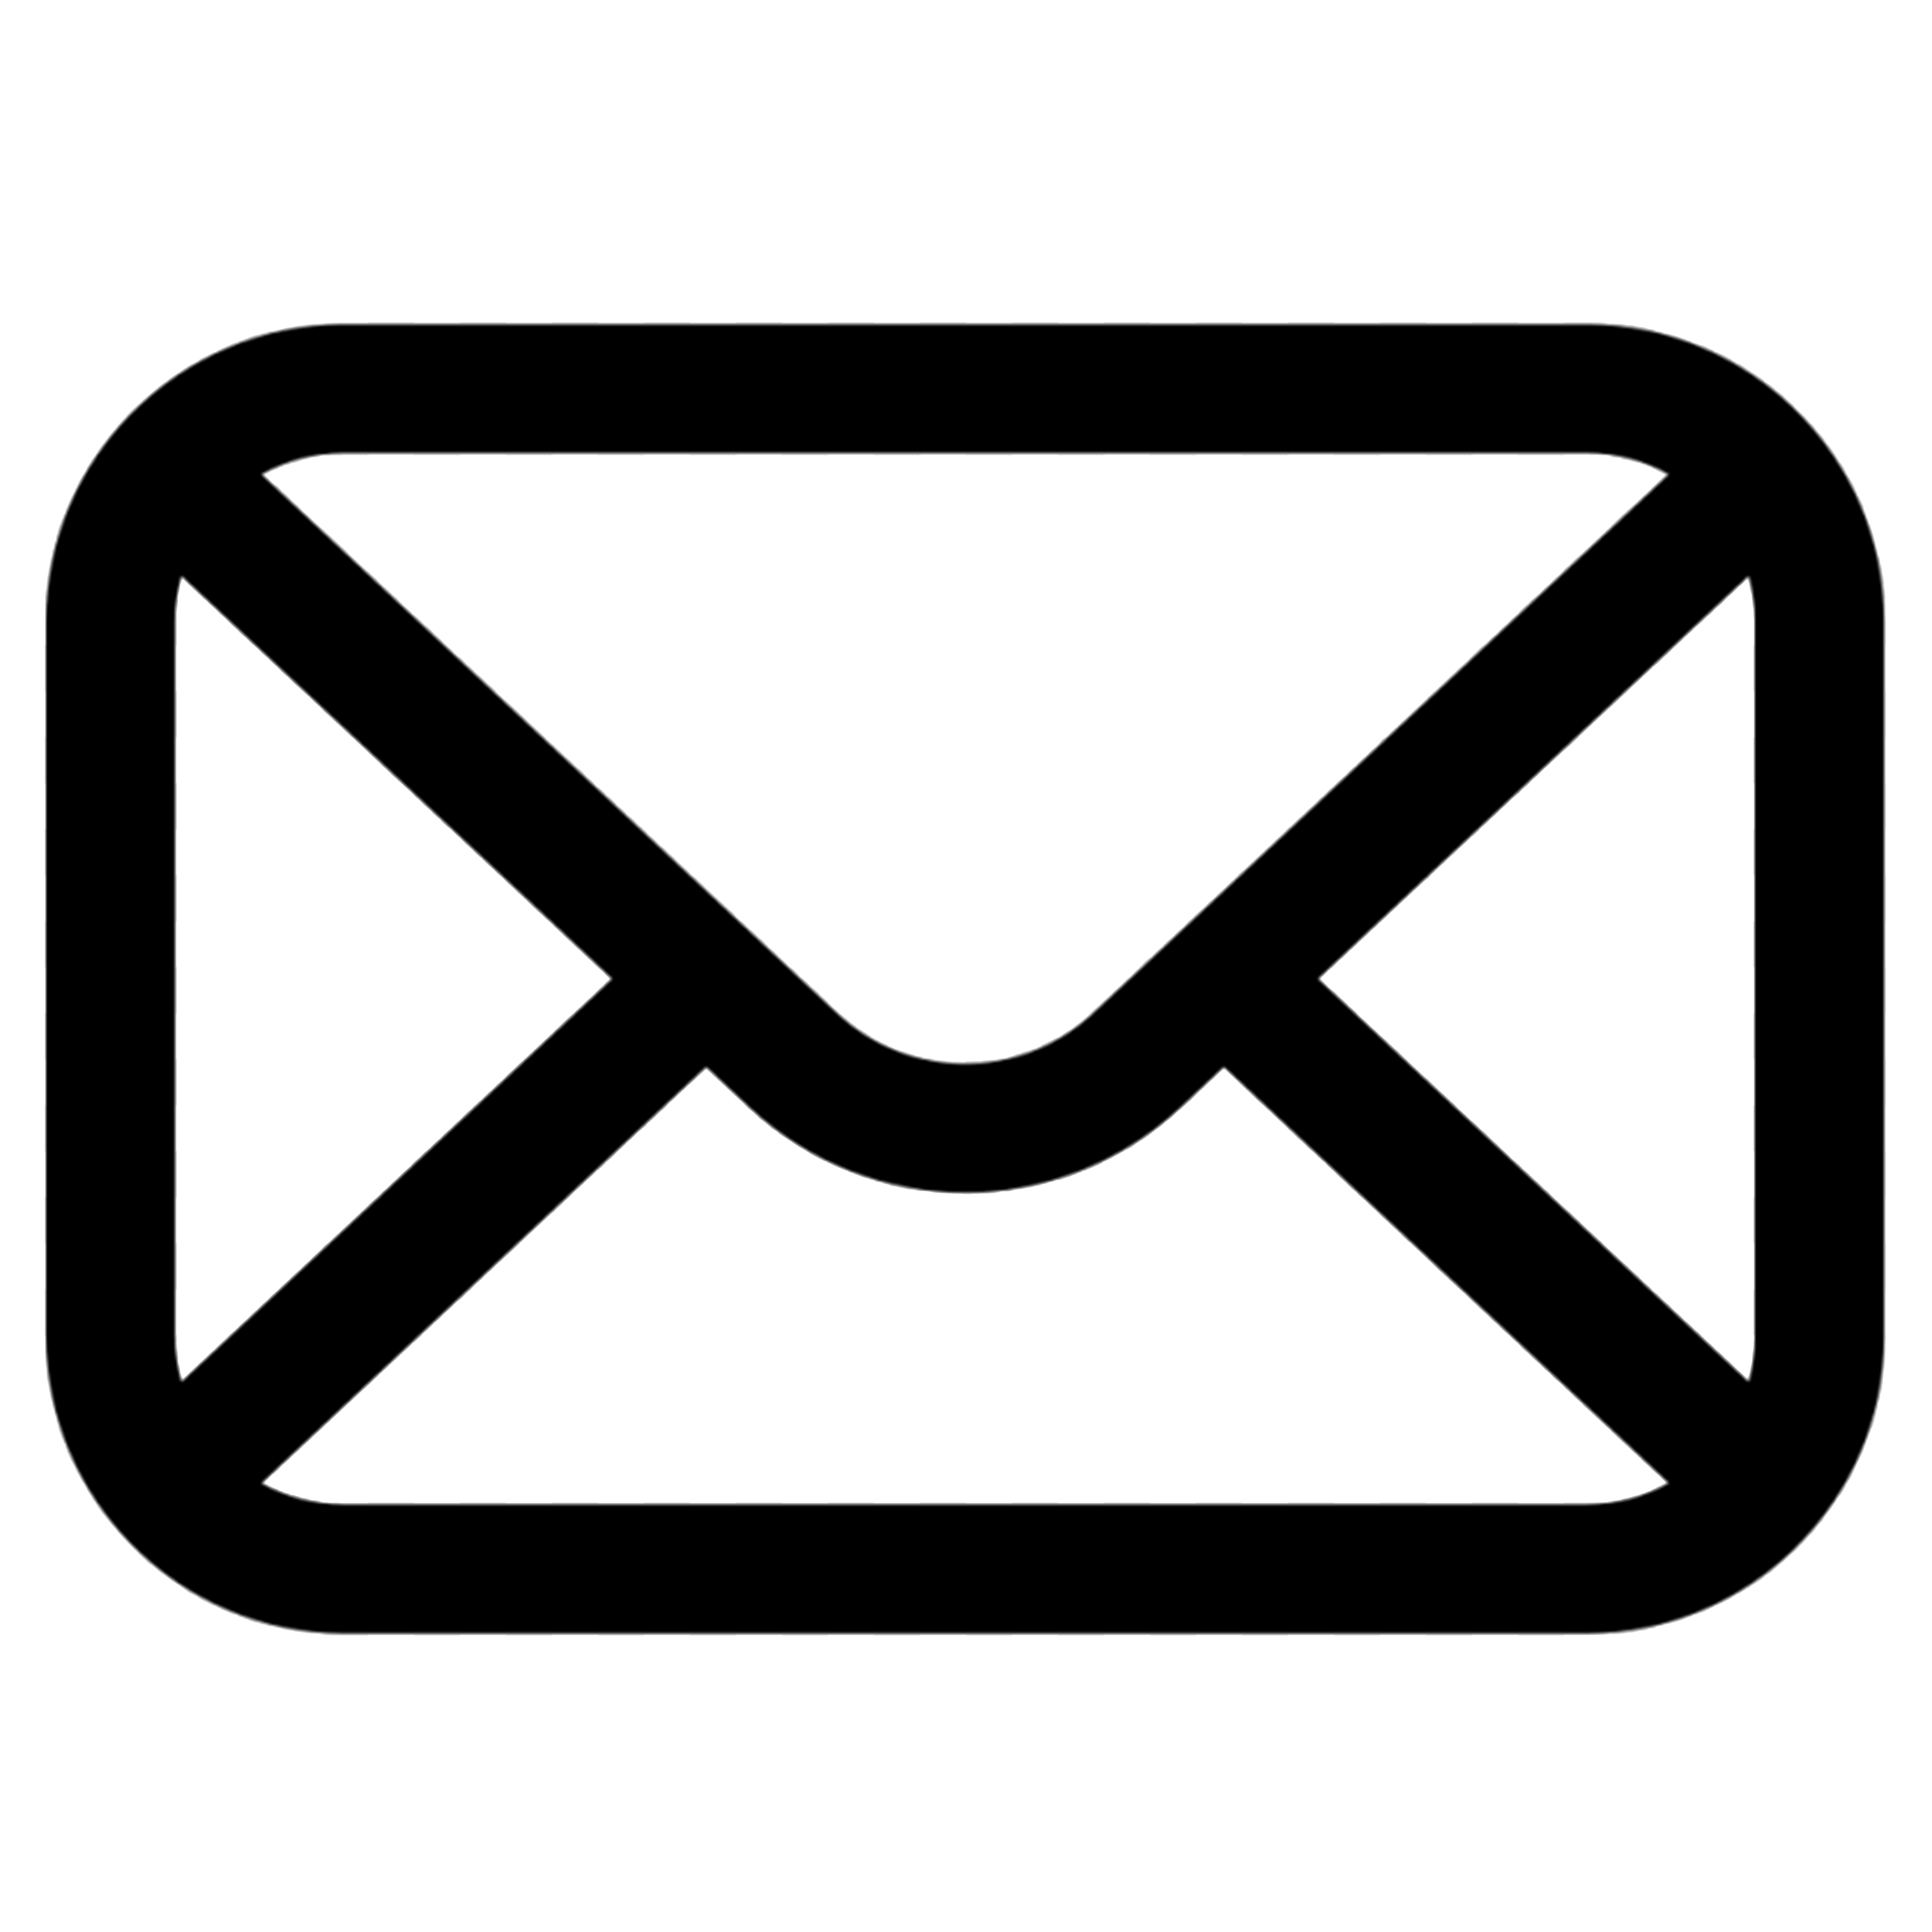 The icon for Email